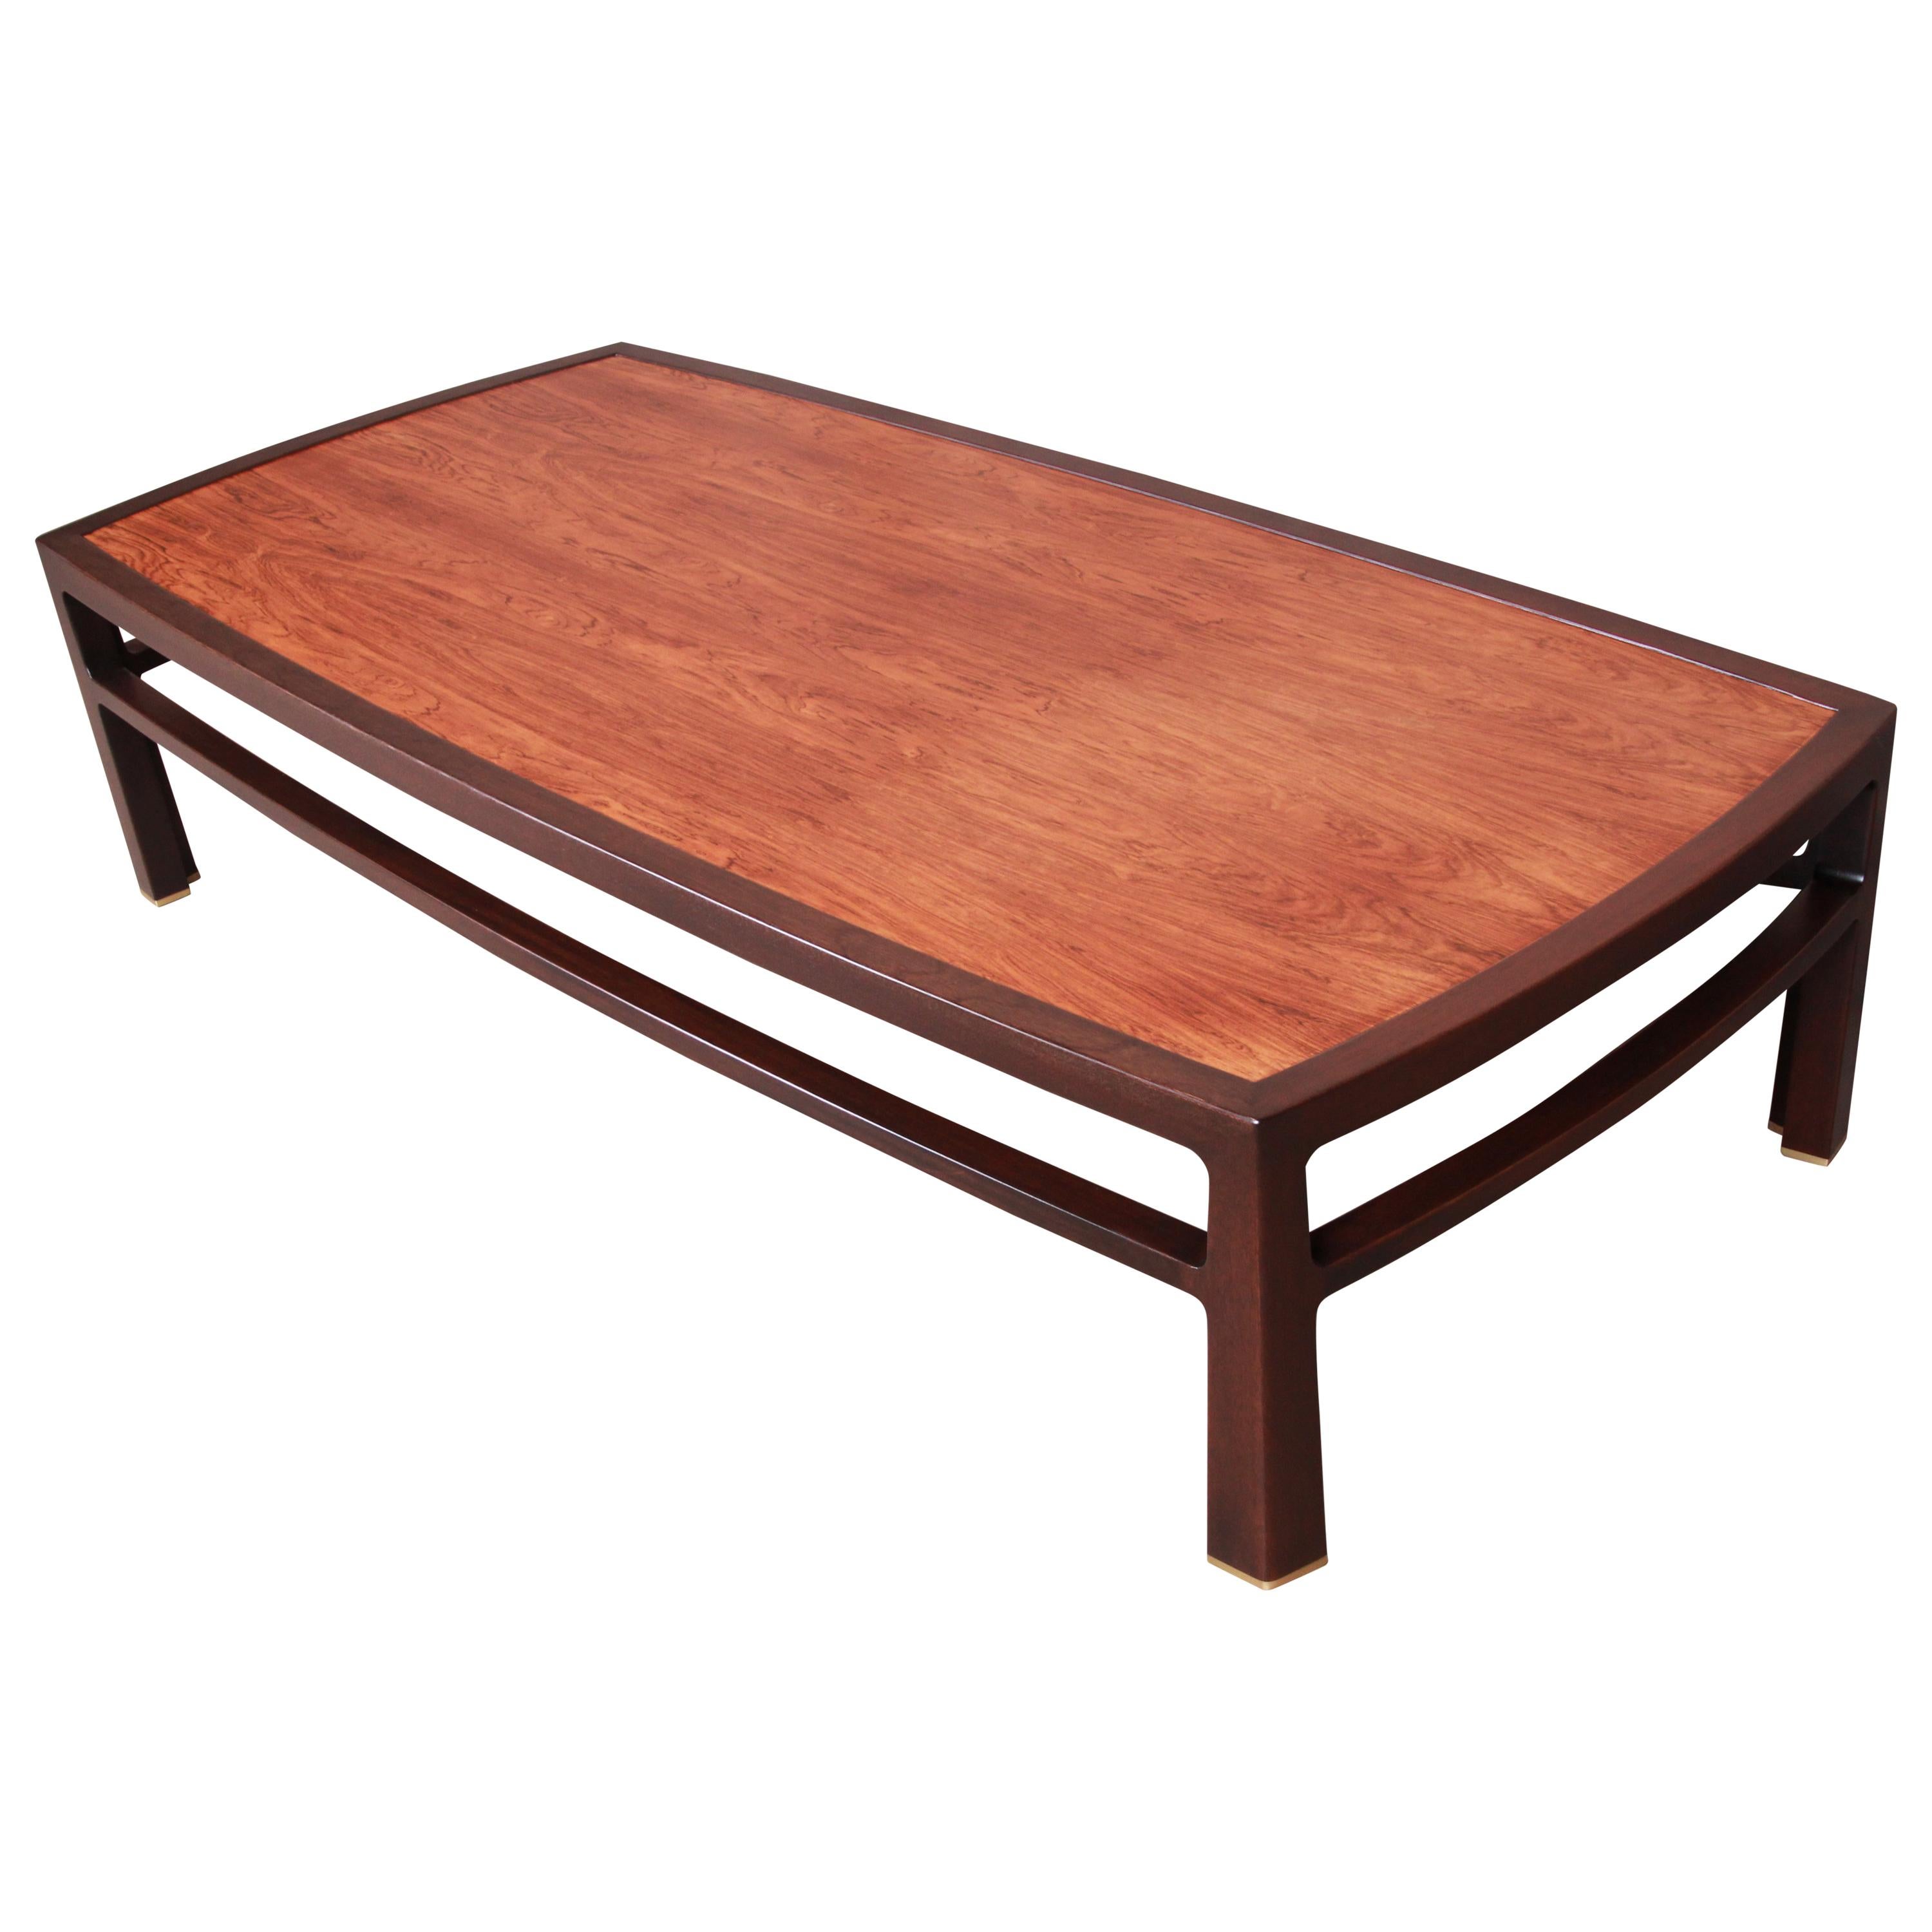 Edward Wormley for Dunbar Monumental Rosewood and Walnut Coffee Table, Restored For Sale